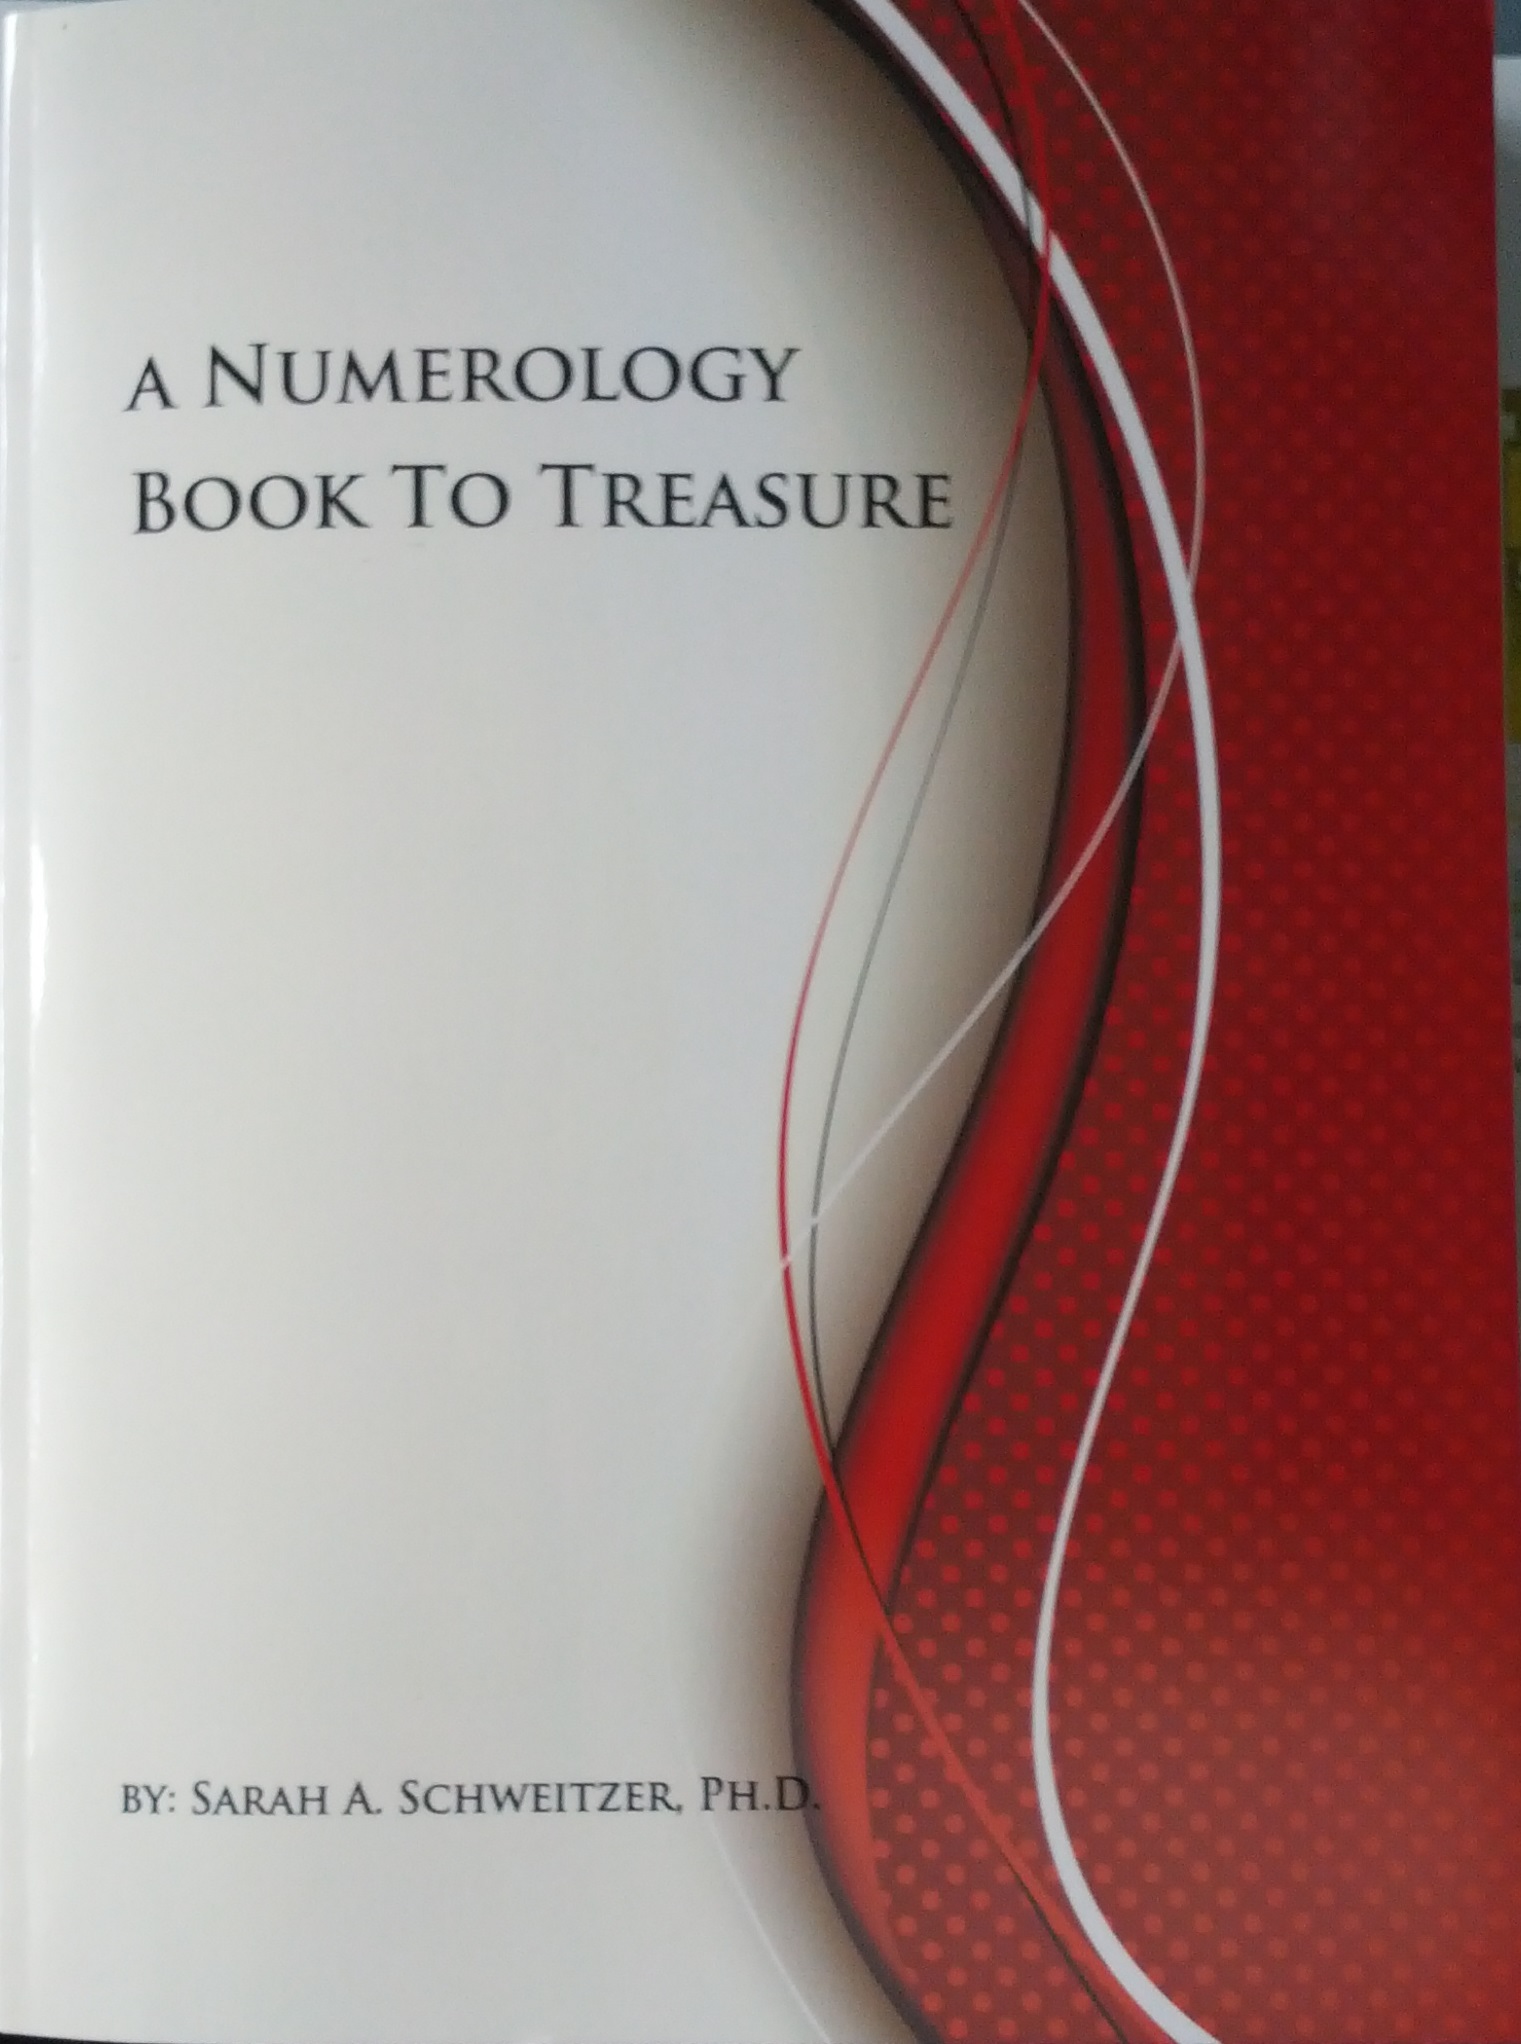 numerology books in india